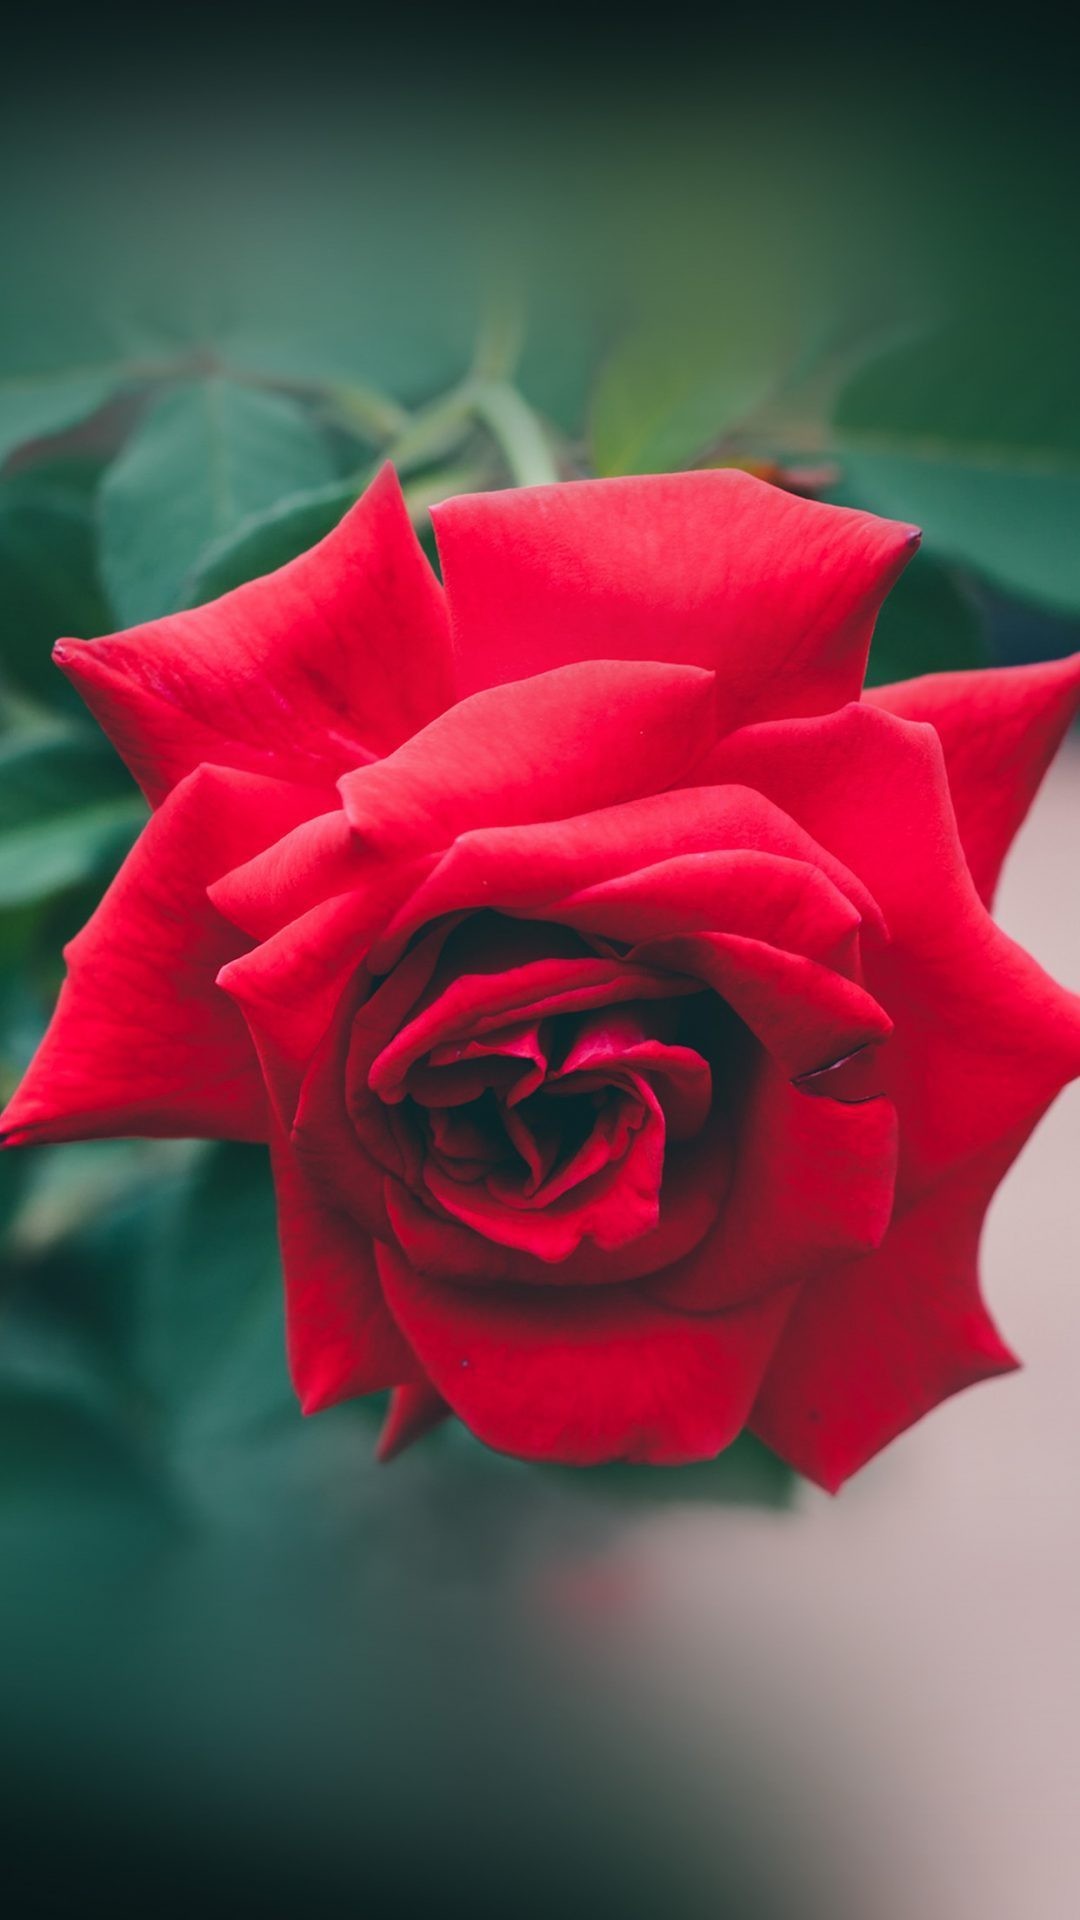 1080x1920 iPhone 8 Red Rose Nature Flower Wood Love Valentine